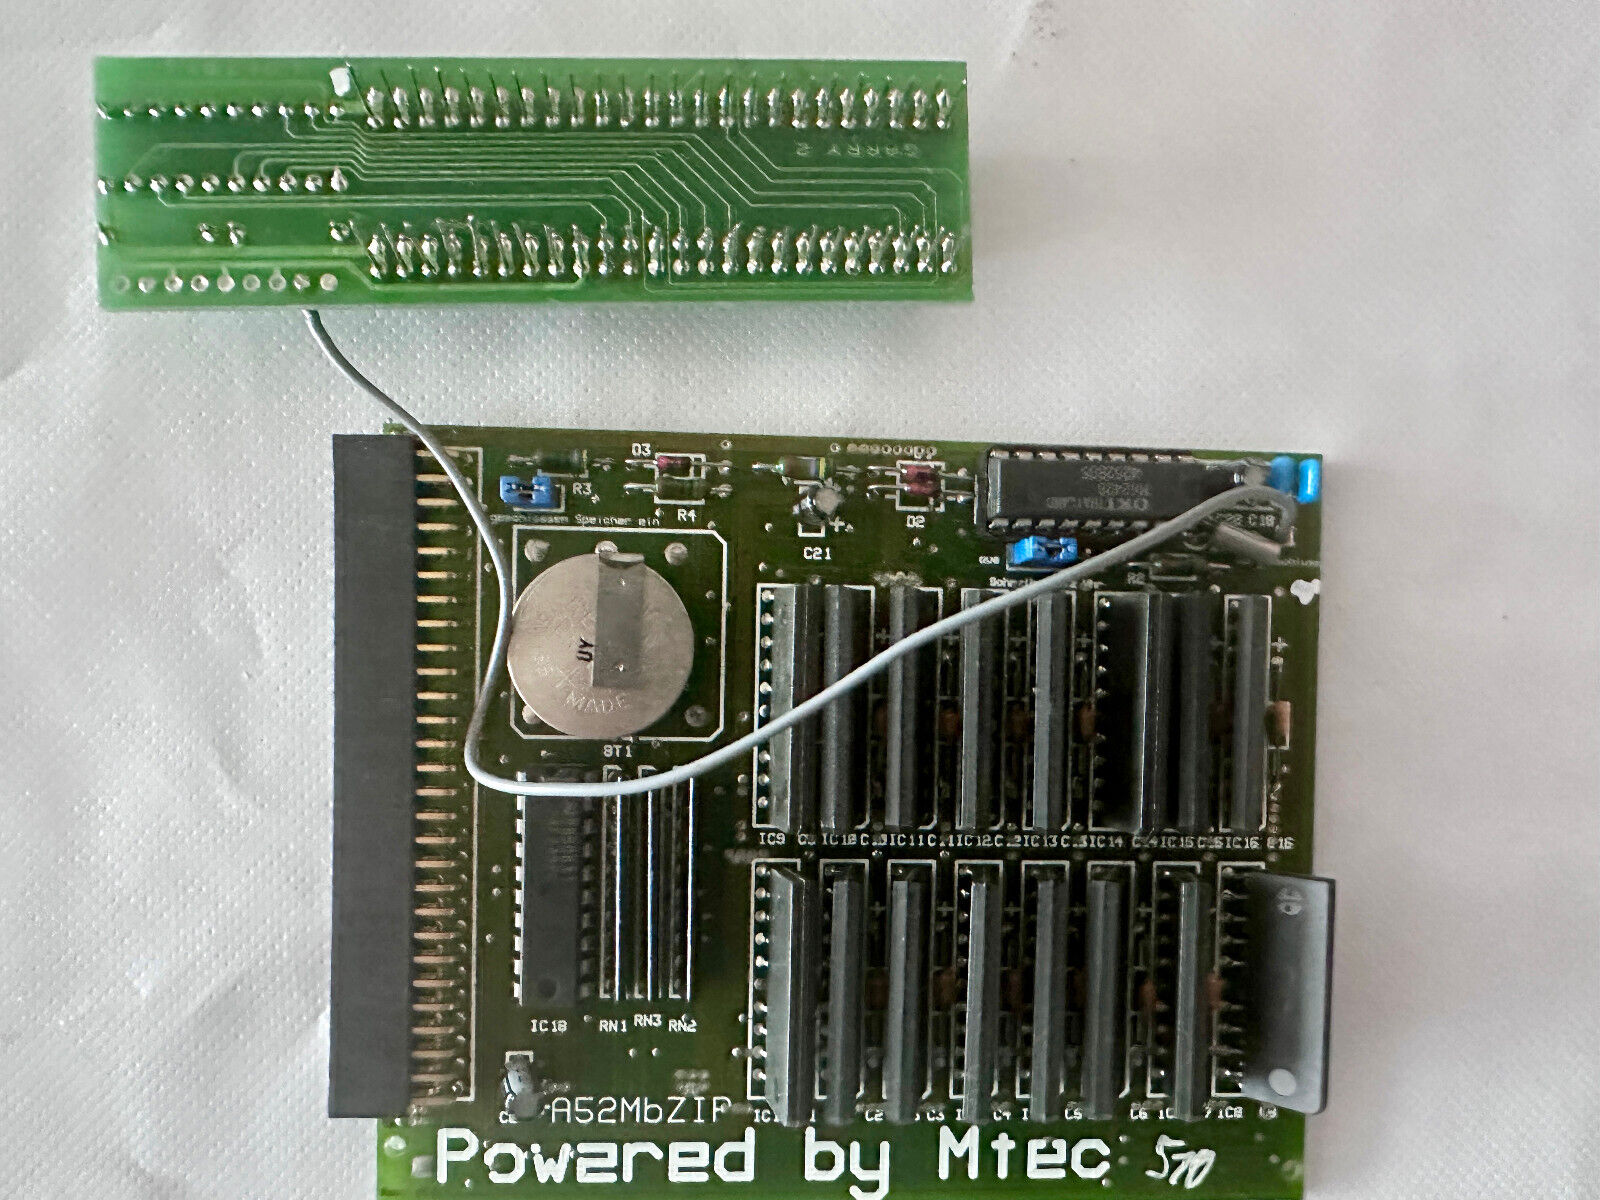 Mtec +A52mb Zip -2 MB RAM - Memory Expansion for Amiga 500/A500 Works